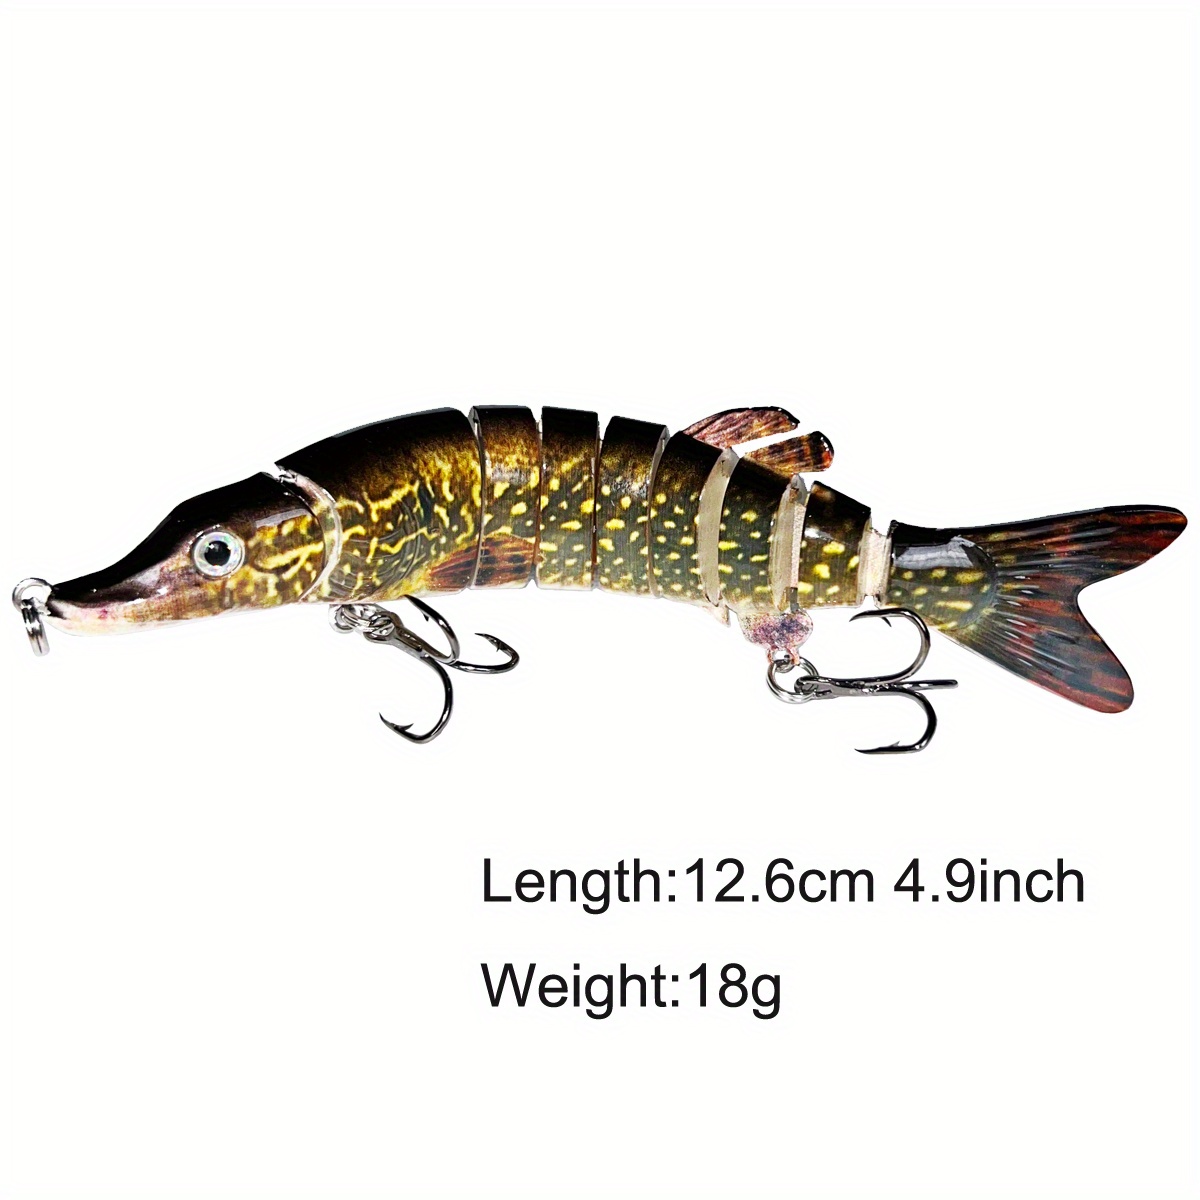  Duck Fishing Lures For Bass, Multi Jointed Swimbaits,  Lifelike Duck Swimmer For Trout Perch Pike Crappie Walleye Fishing